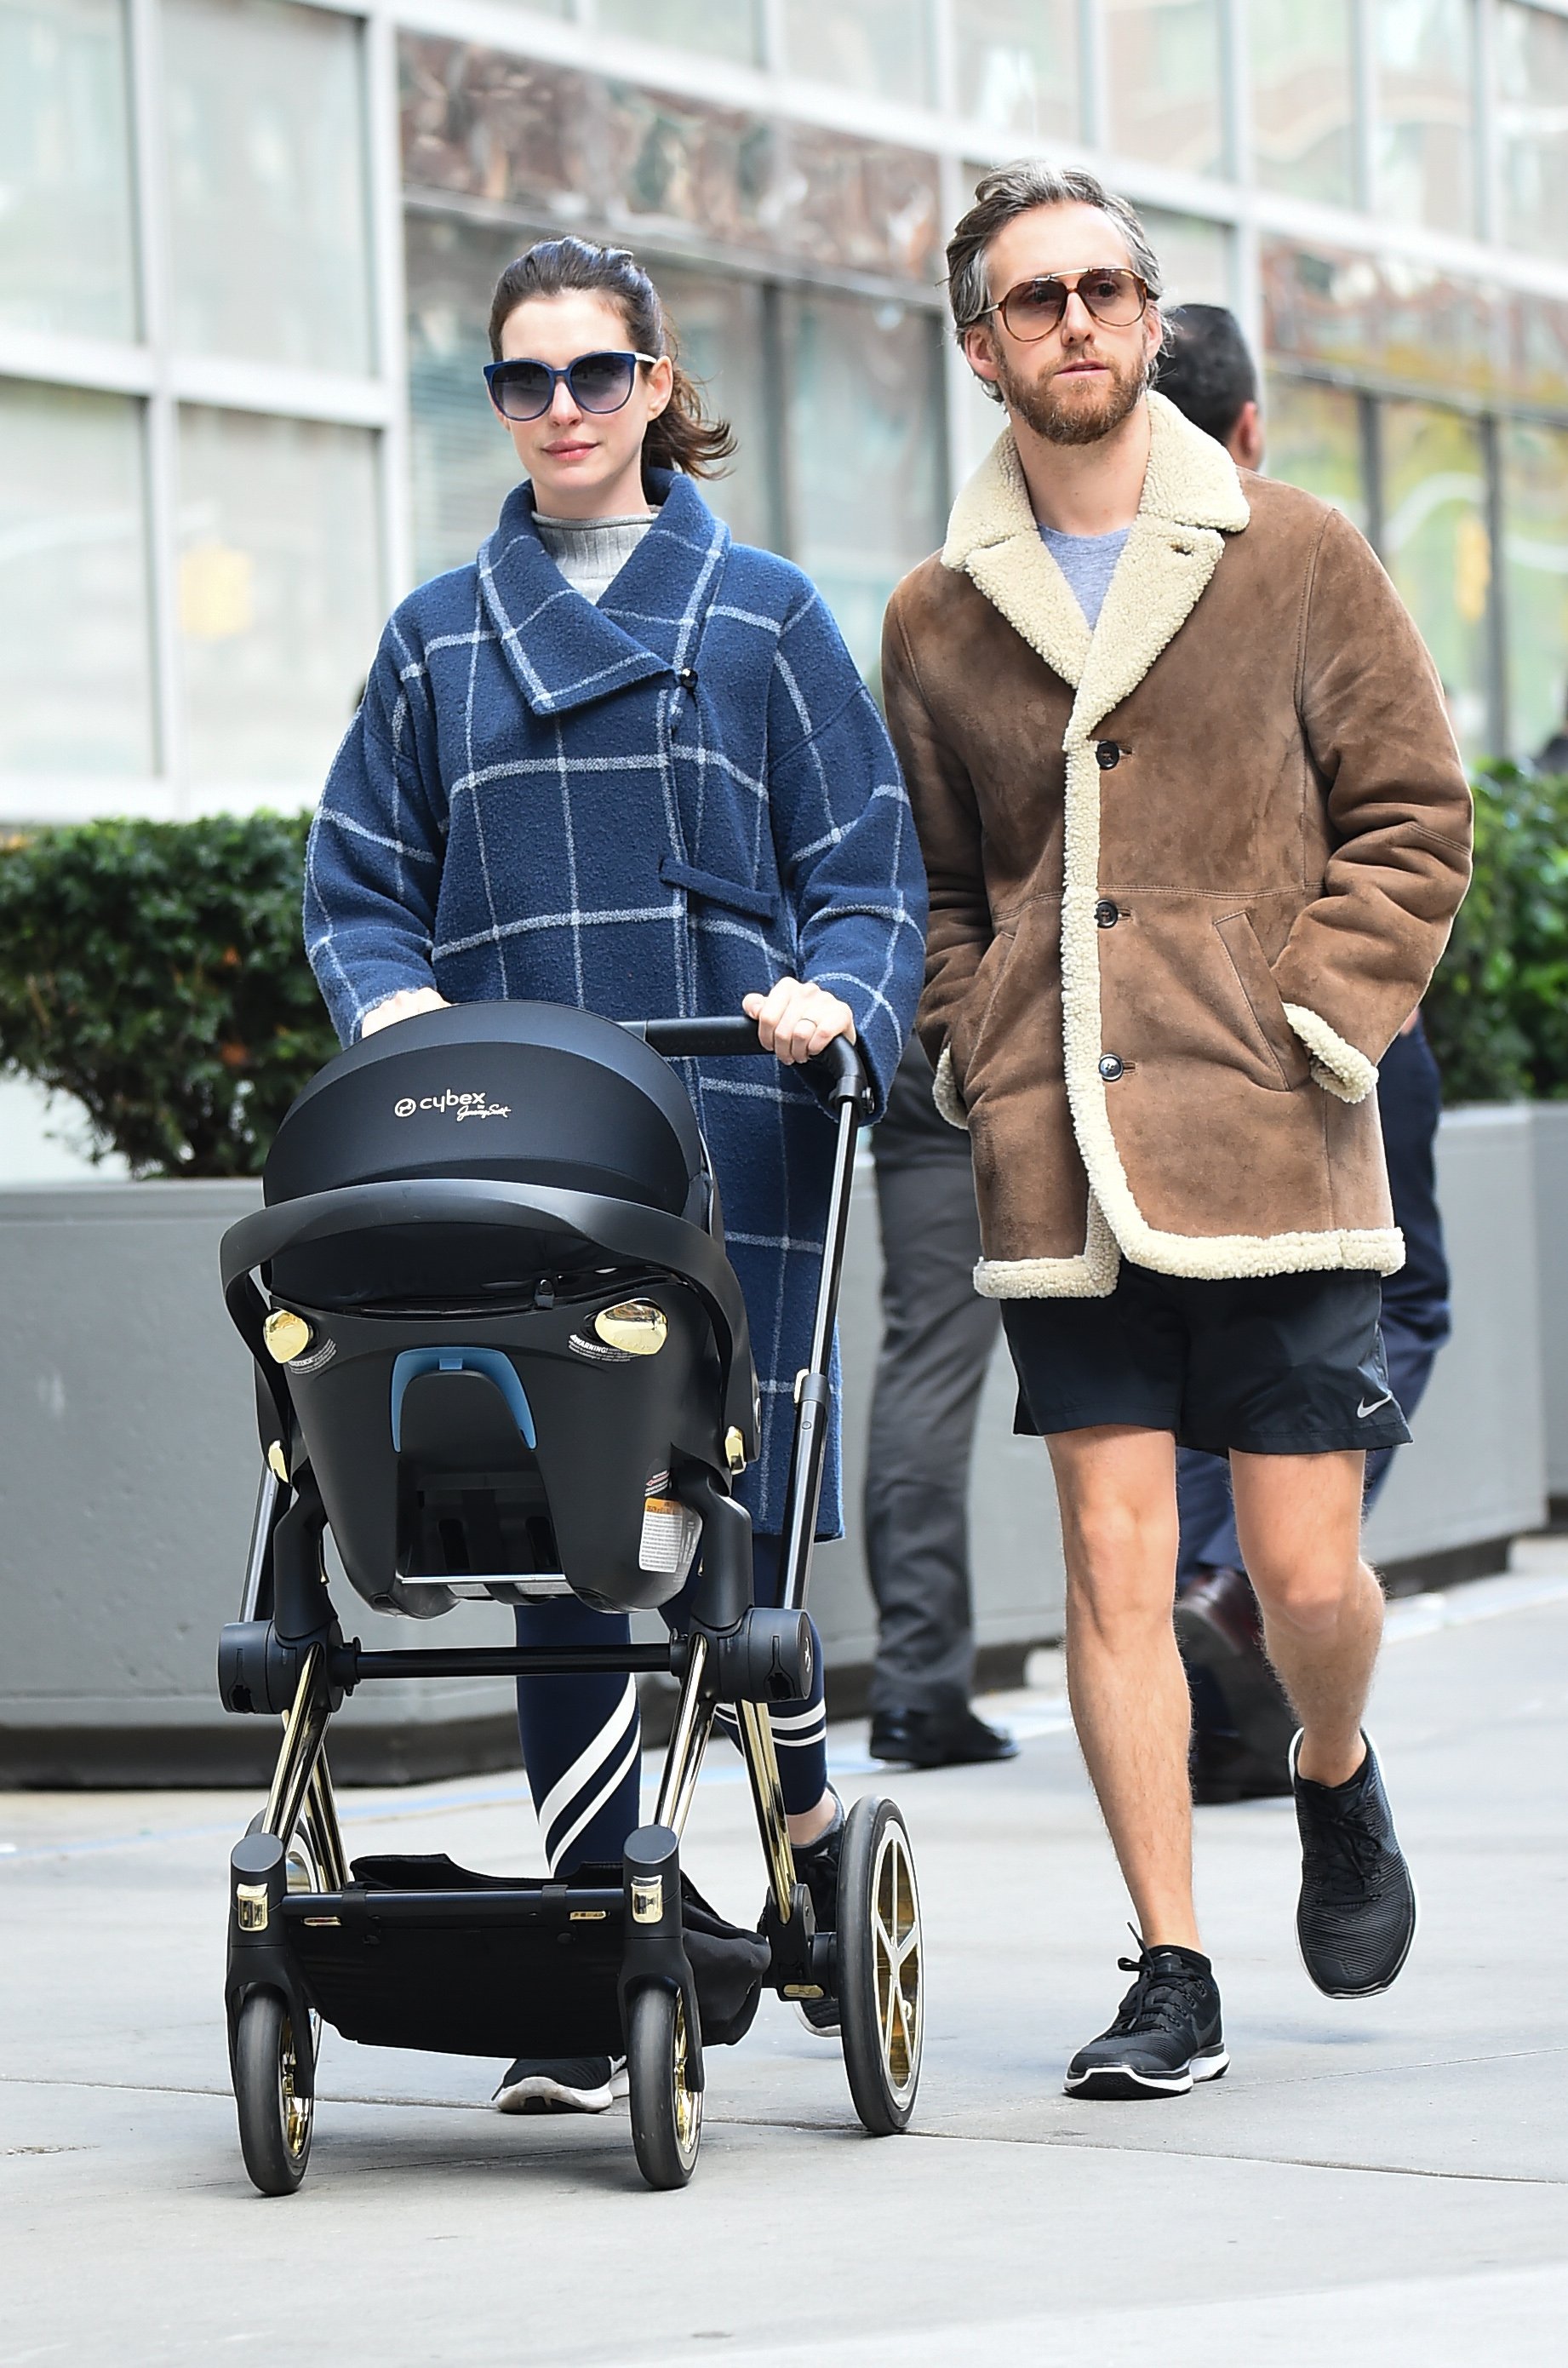 Anne Hathaway and Adam Shulman are seen walking with their son, Jonathan Rosebanks, in Midtown on October 24, 2016, in New York City | Source: Getty Images